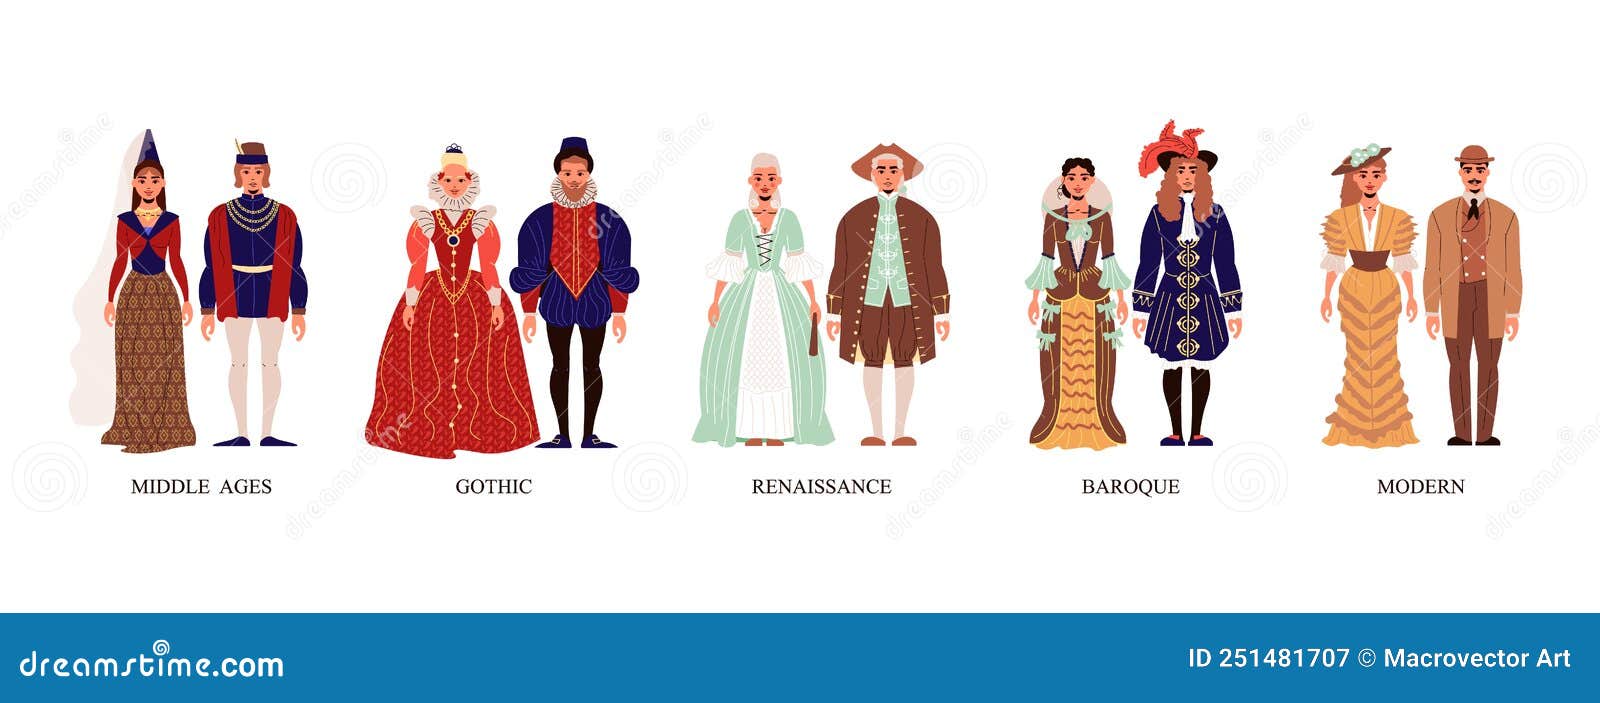 Fashion History Costume from Middle Ages To Modern Stock Vector ...